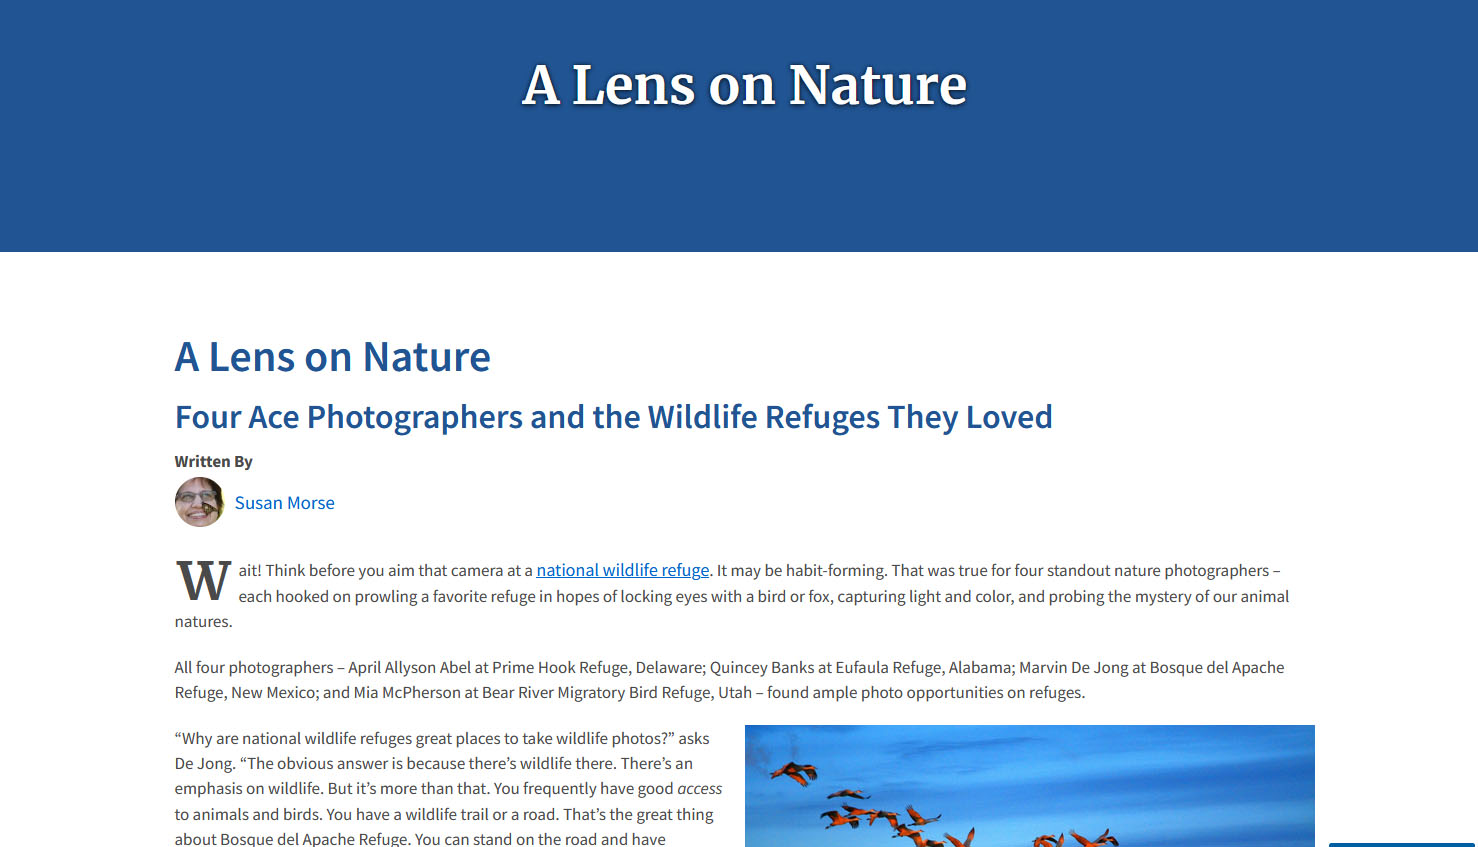 A Lens on Nature - Four Ace Photographers and the Wildlife Refuges They Loved